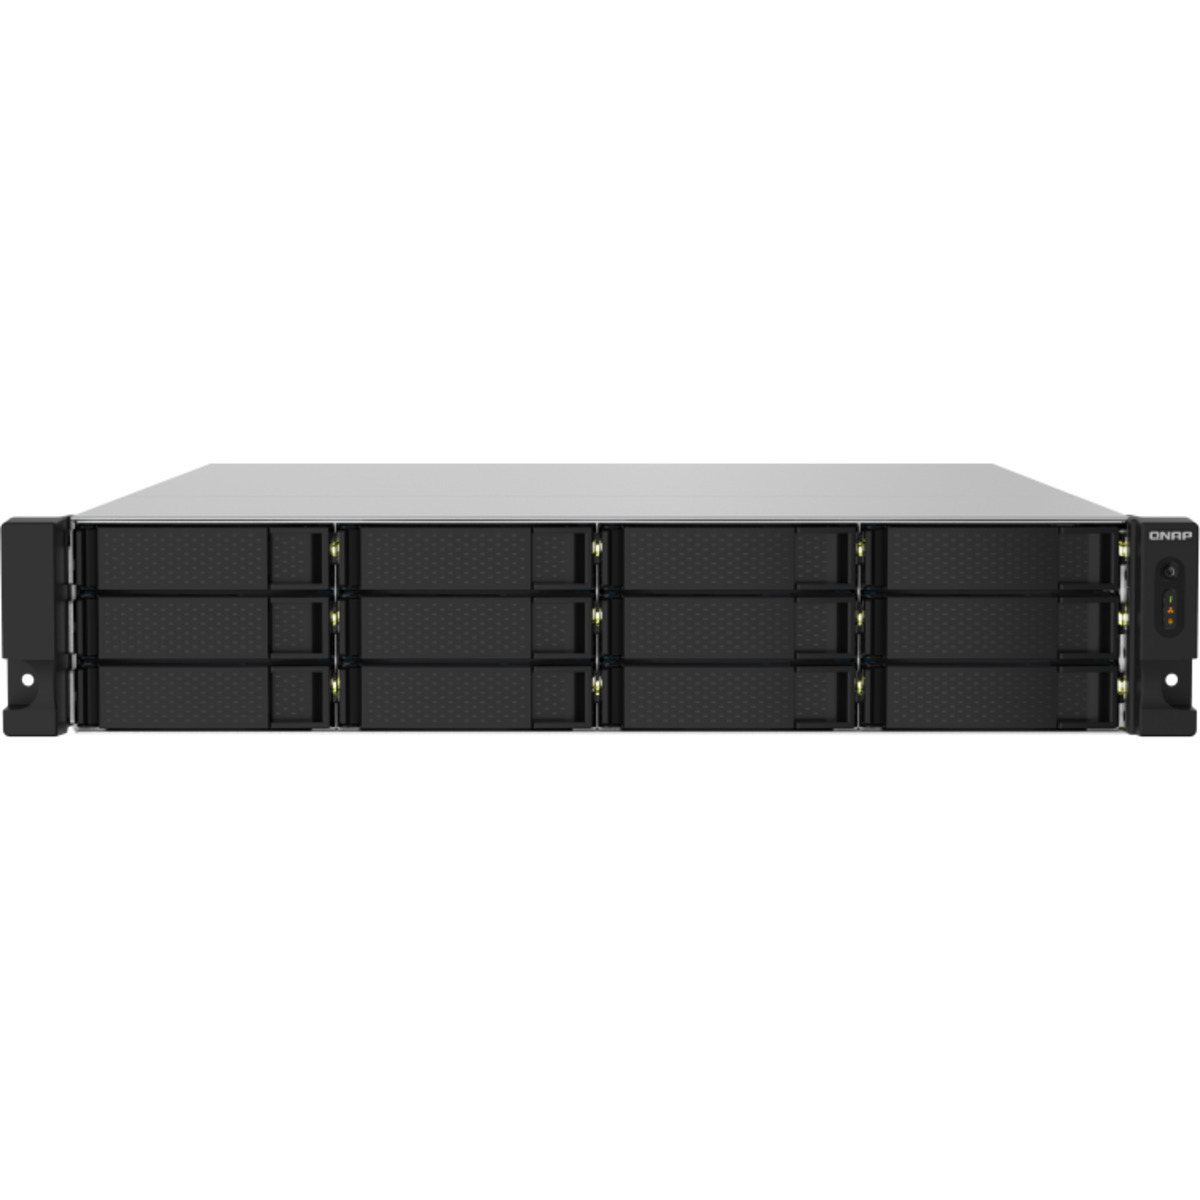 QNAP TS-1232PXU-RP 6tb 12-Bay RackMount Personal / Basic Home / Small Office NAS - Network Attached Storage Device 12x500gb Sandisk Ultra 3D SDSSDH3-500G 2.5 560/520MB/s SATA 6Gb/s SSD CONSUMER Class Drives Installed - Burn-In Tested - FREE RAM UPGRADE TS-1232PXU-RP